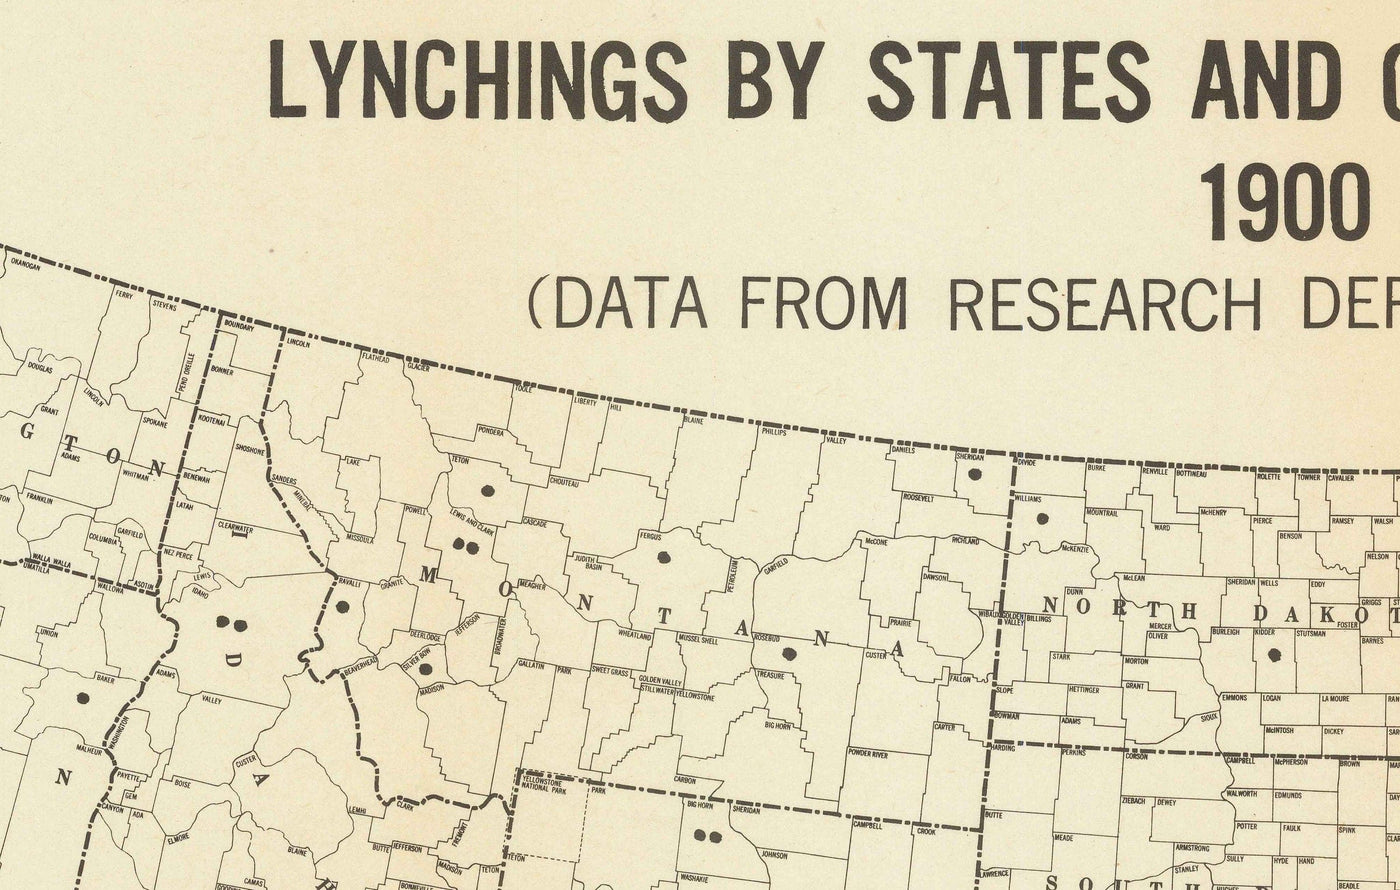 Old Map of Lynchings in America, 1900-1931 - African American Racial Injustice, Deep South USA, Jim Crow, KKK